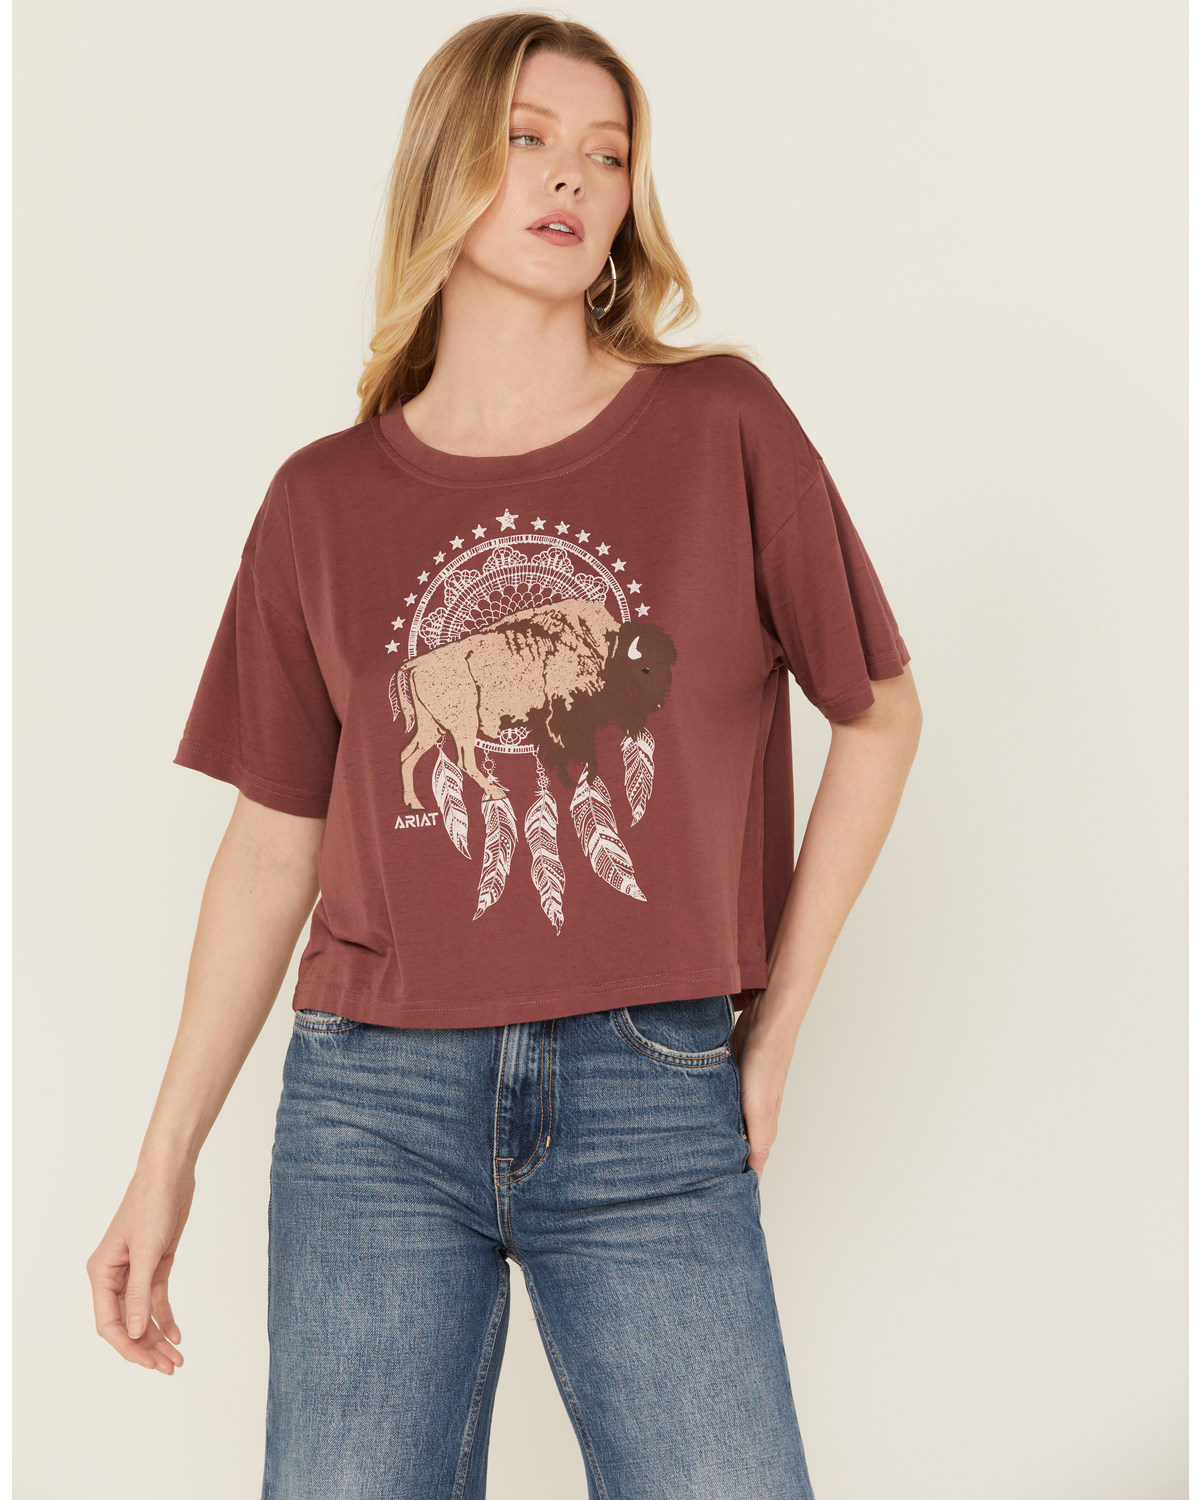 Ariat Women's Buffalo Short Sleeve Cropped Graphic Tee